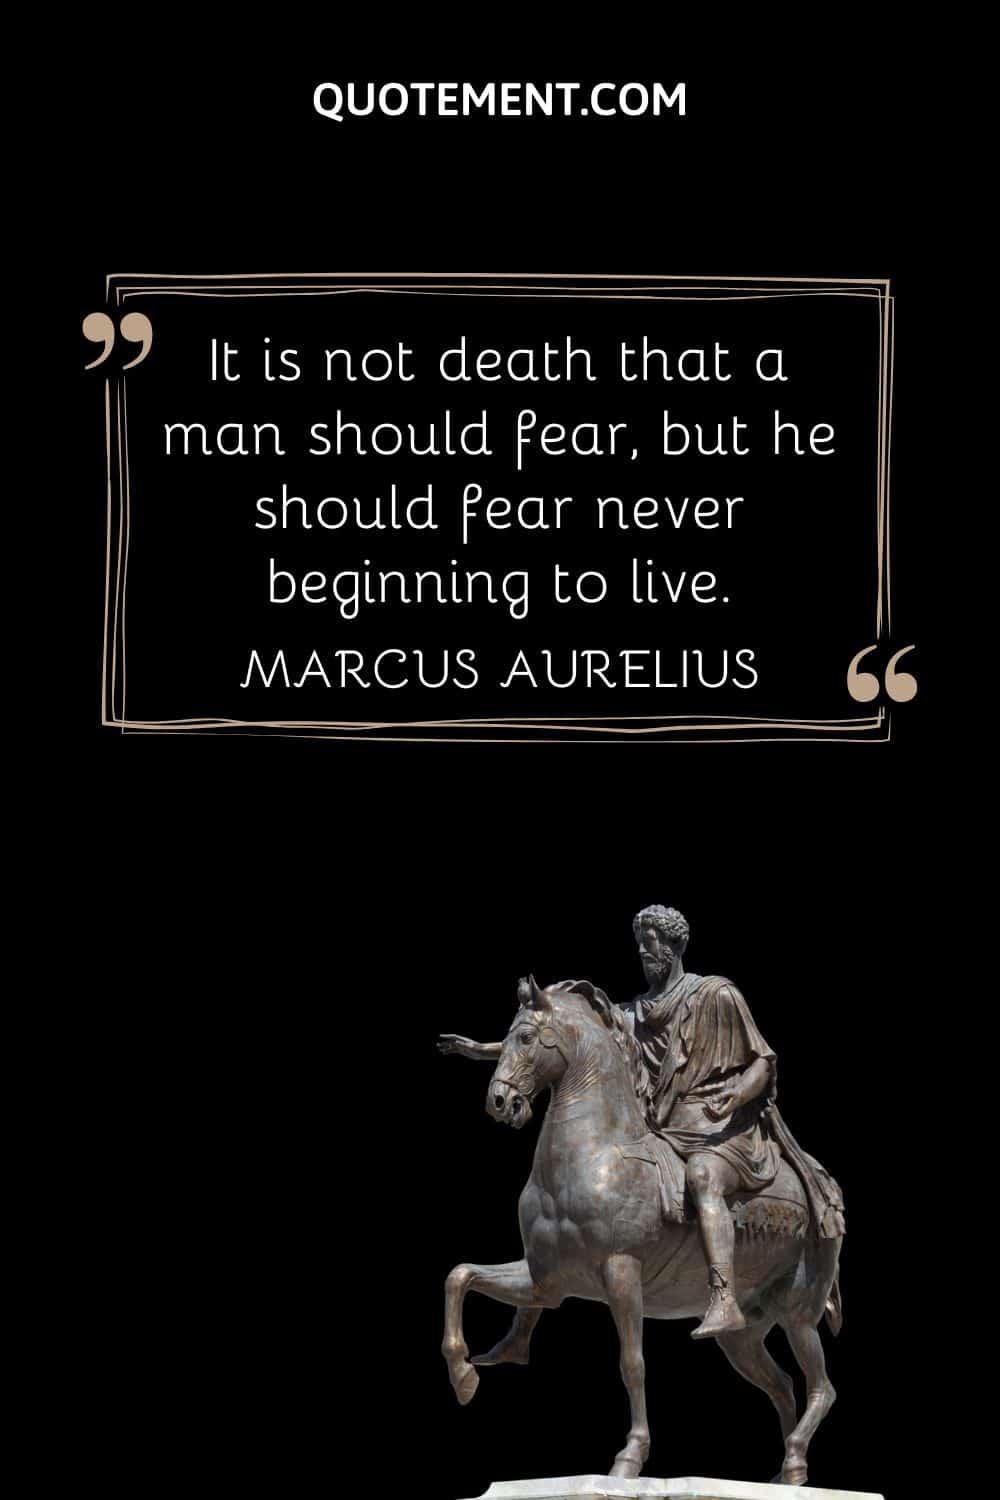 “It is not death that a man should fear, but he should fear never beginning to live.” — Marcus Aurelius (2)